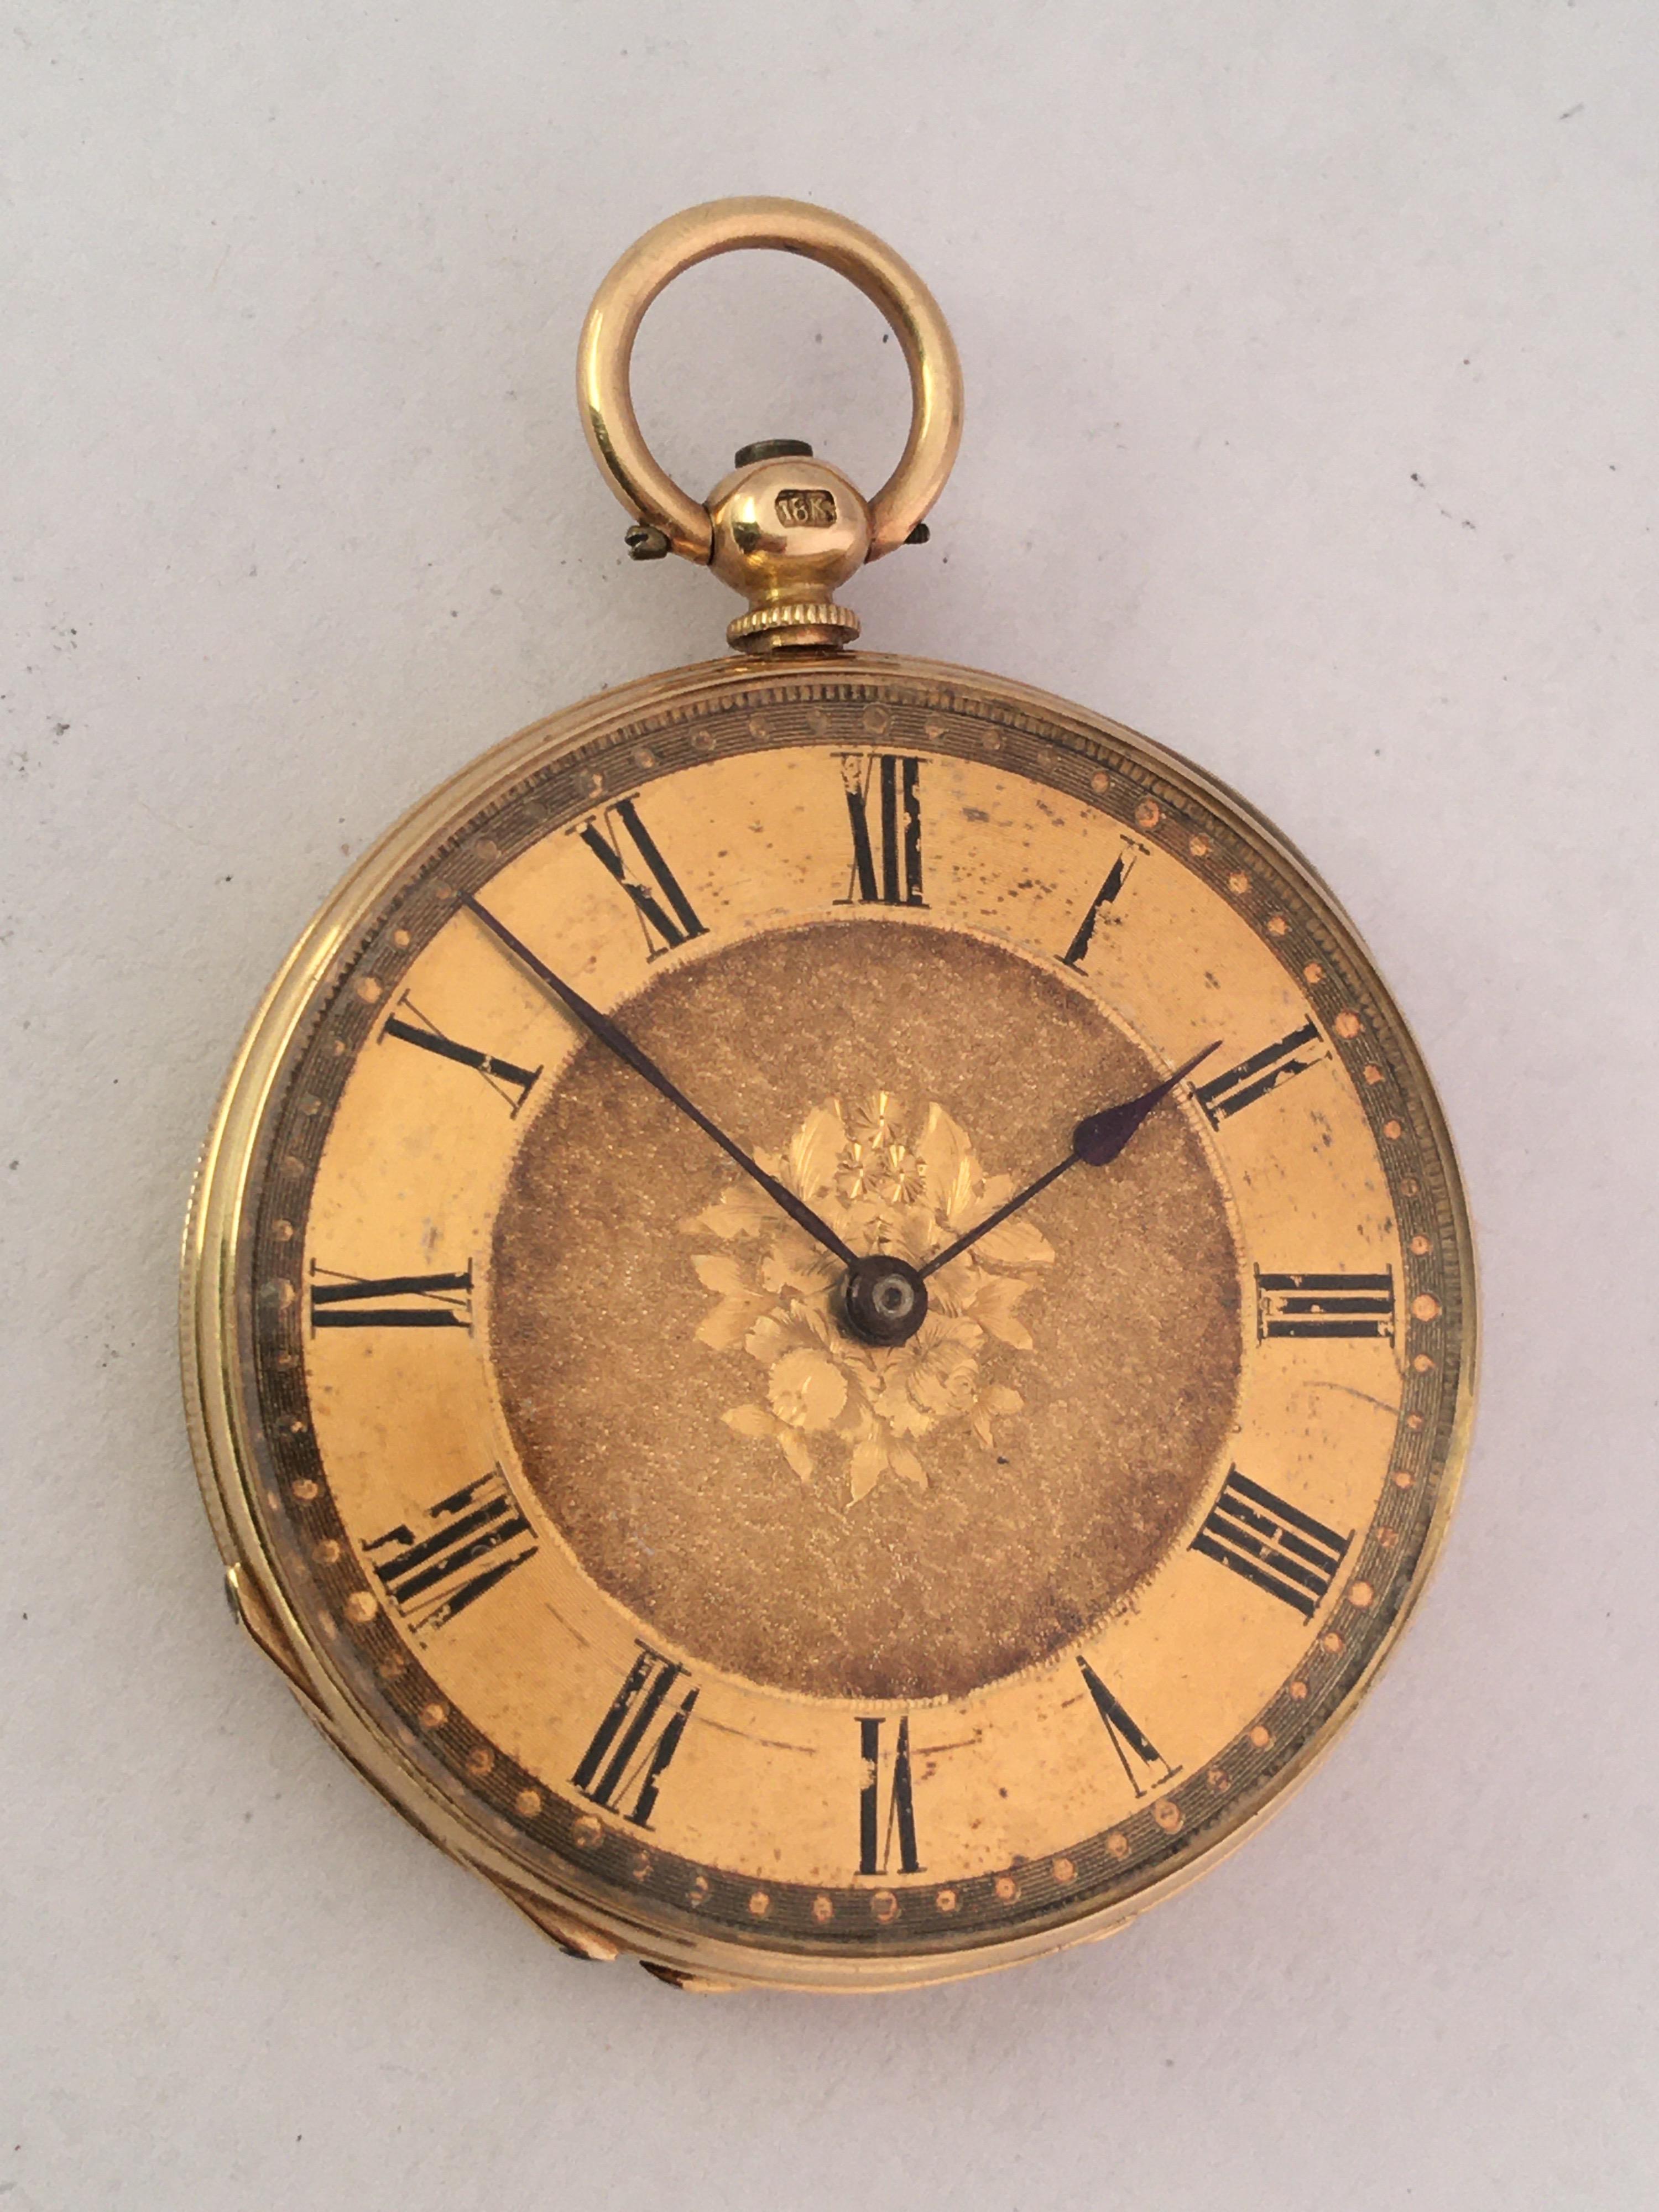 Swiss 18ct cylinder fob watch, gilt frosted bar movement, the gilded dial with a matt centre, Roman numerals and blued steel hands, engine turned case, no. 4322, 34.3gm, 37mm; with the original box and a winding key.

Condition:
Movement - appears